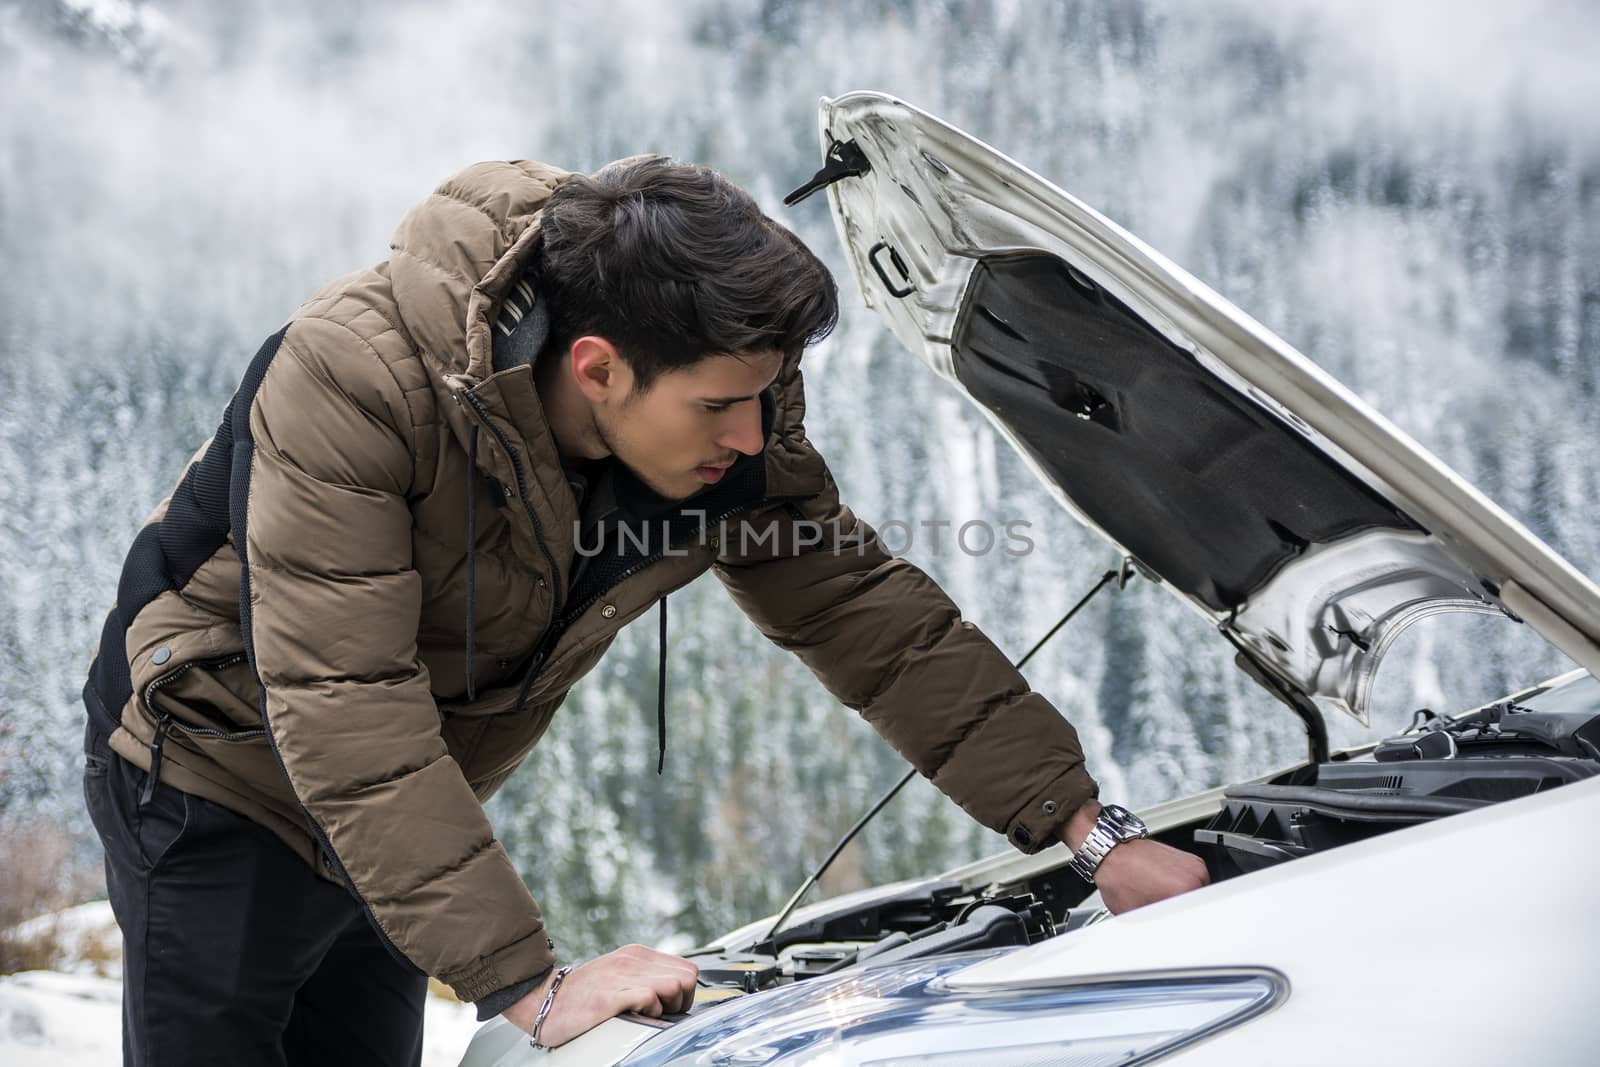 Young man near car with open hood inspecting engine. Snowy forest on background